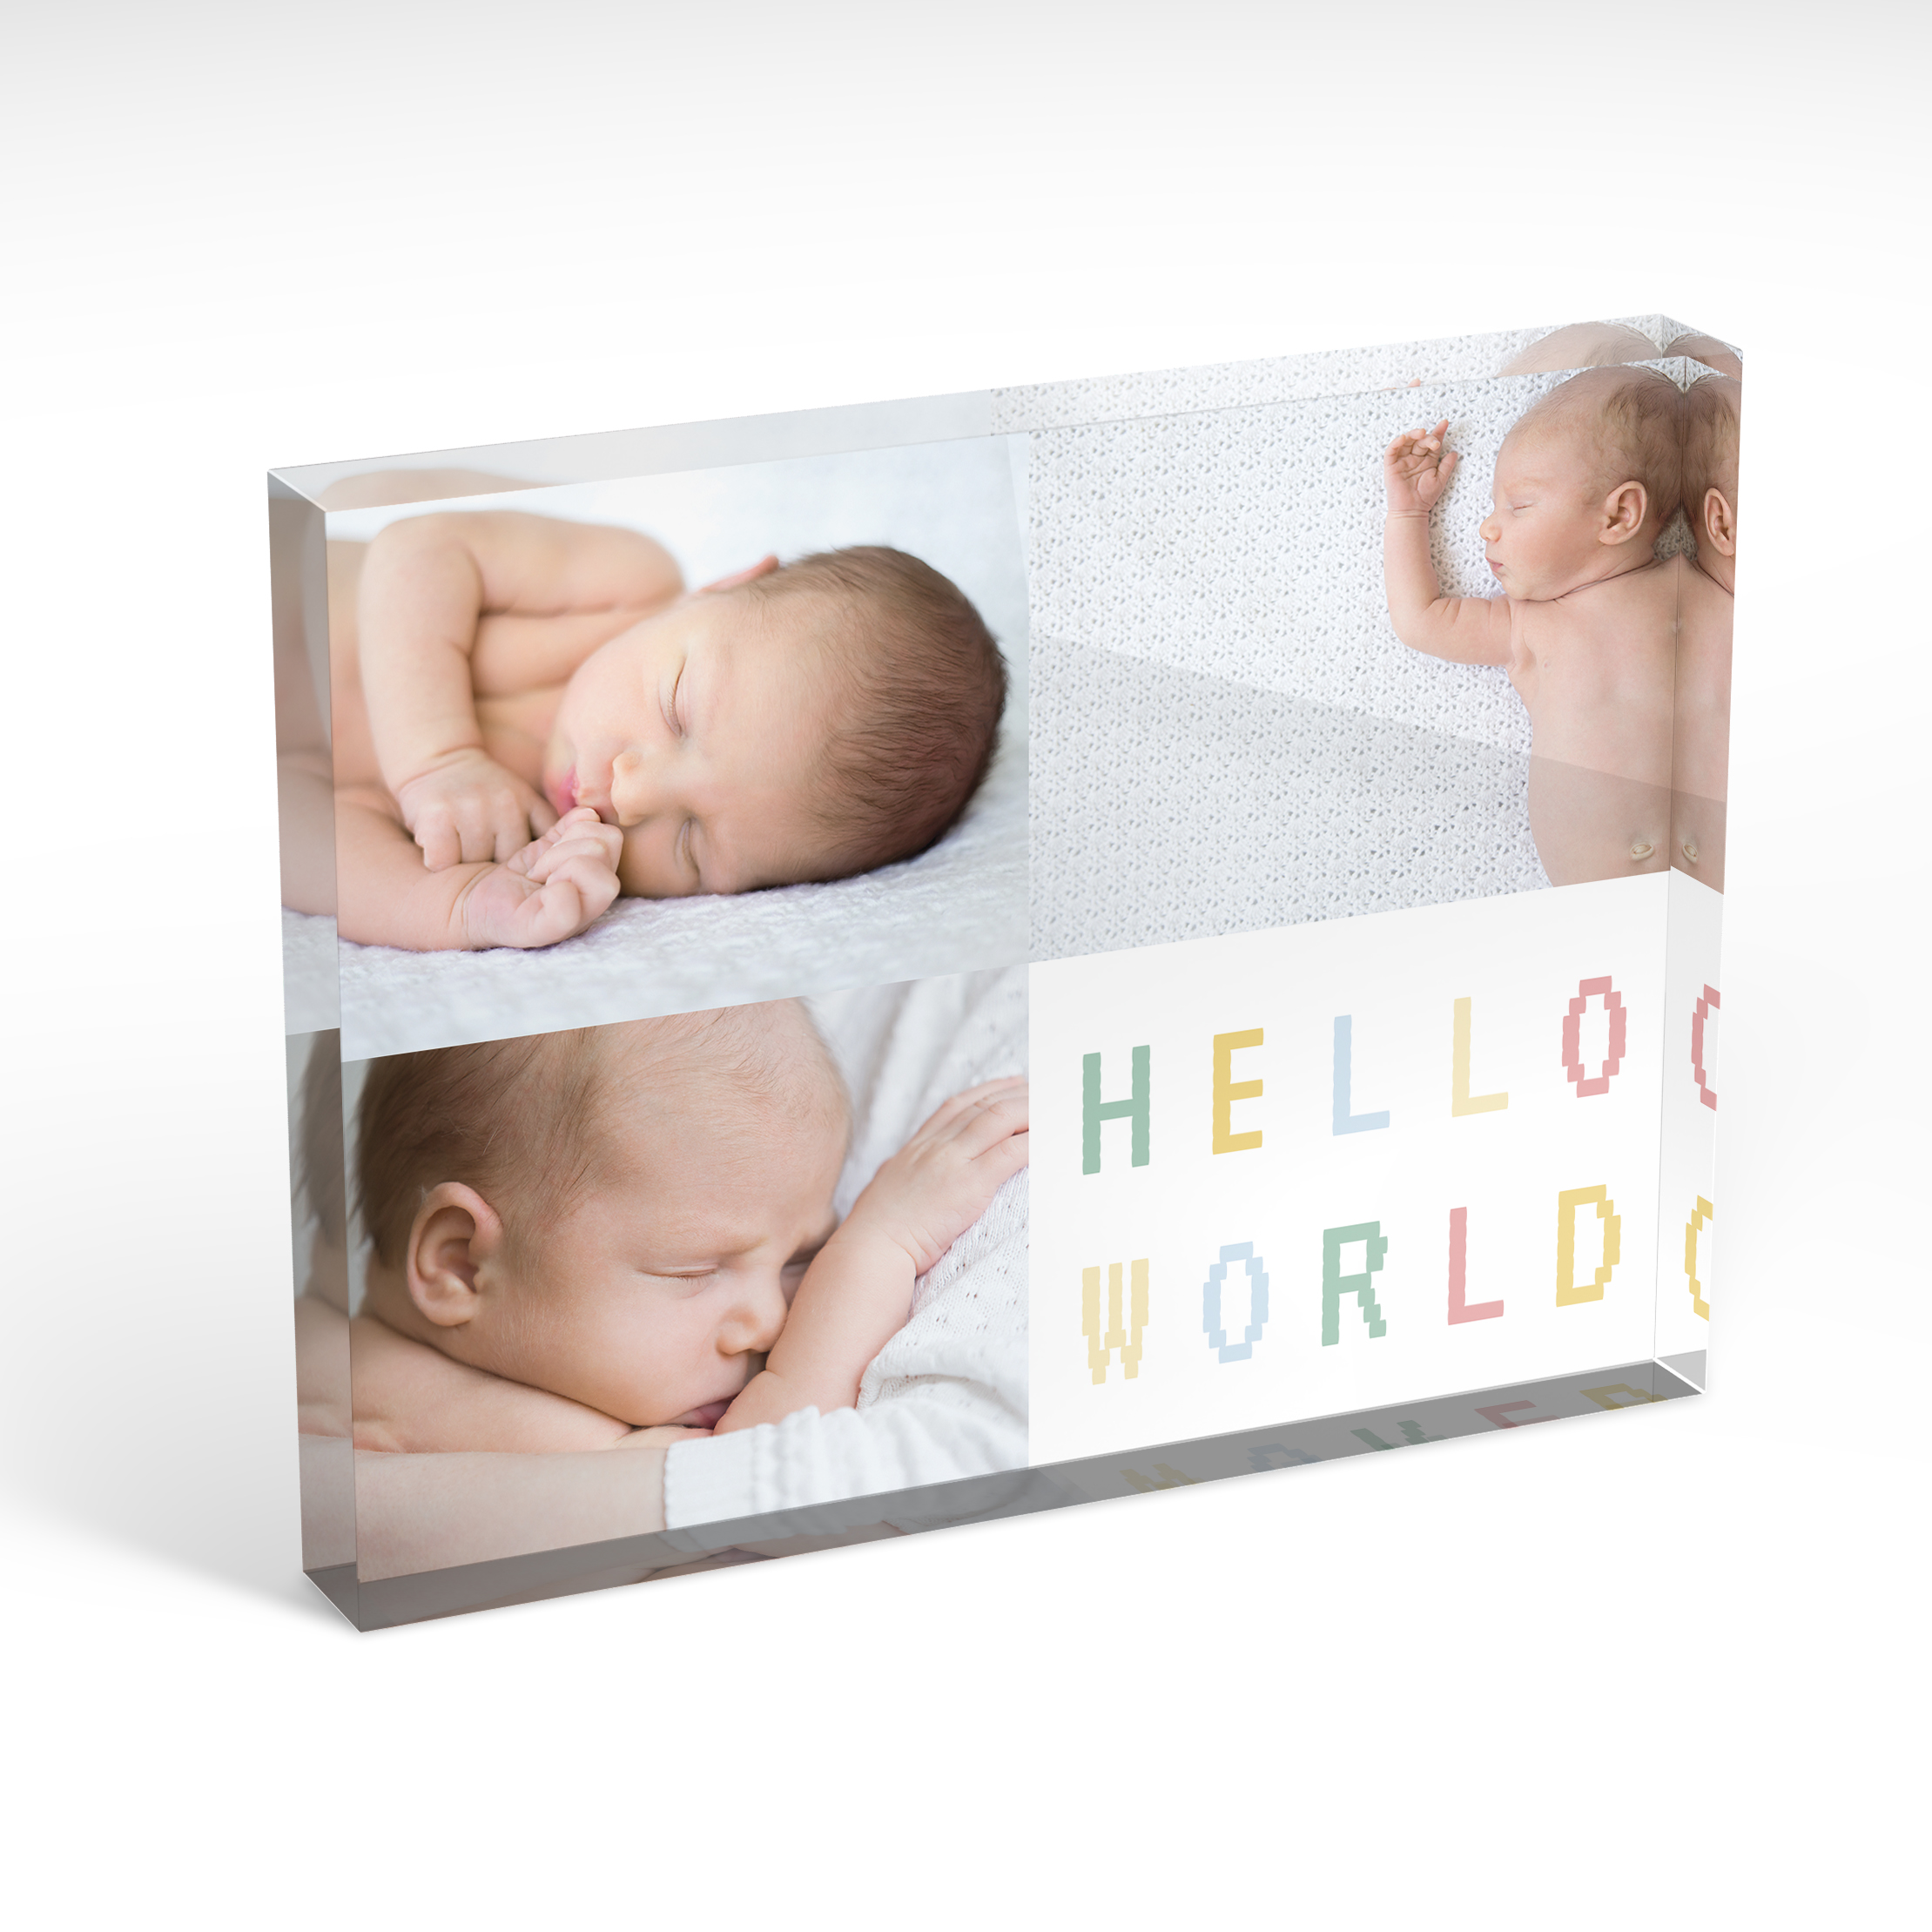 An angled side view of a landscape layout Acrylic Photo Block with space for 3 photos. Thiis design is named "Hello World Corner". 